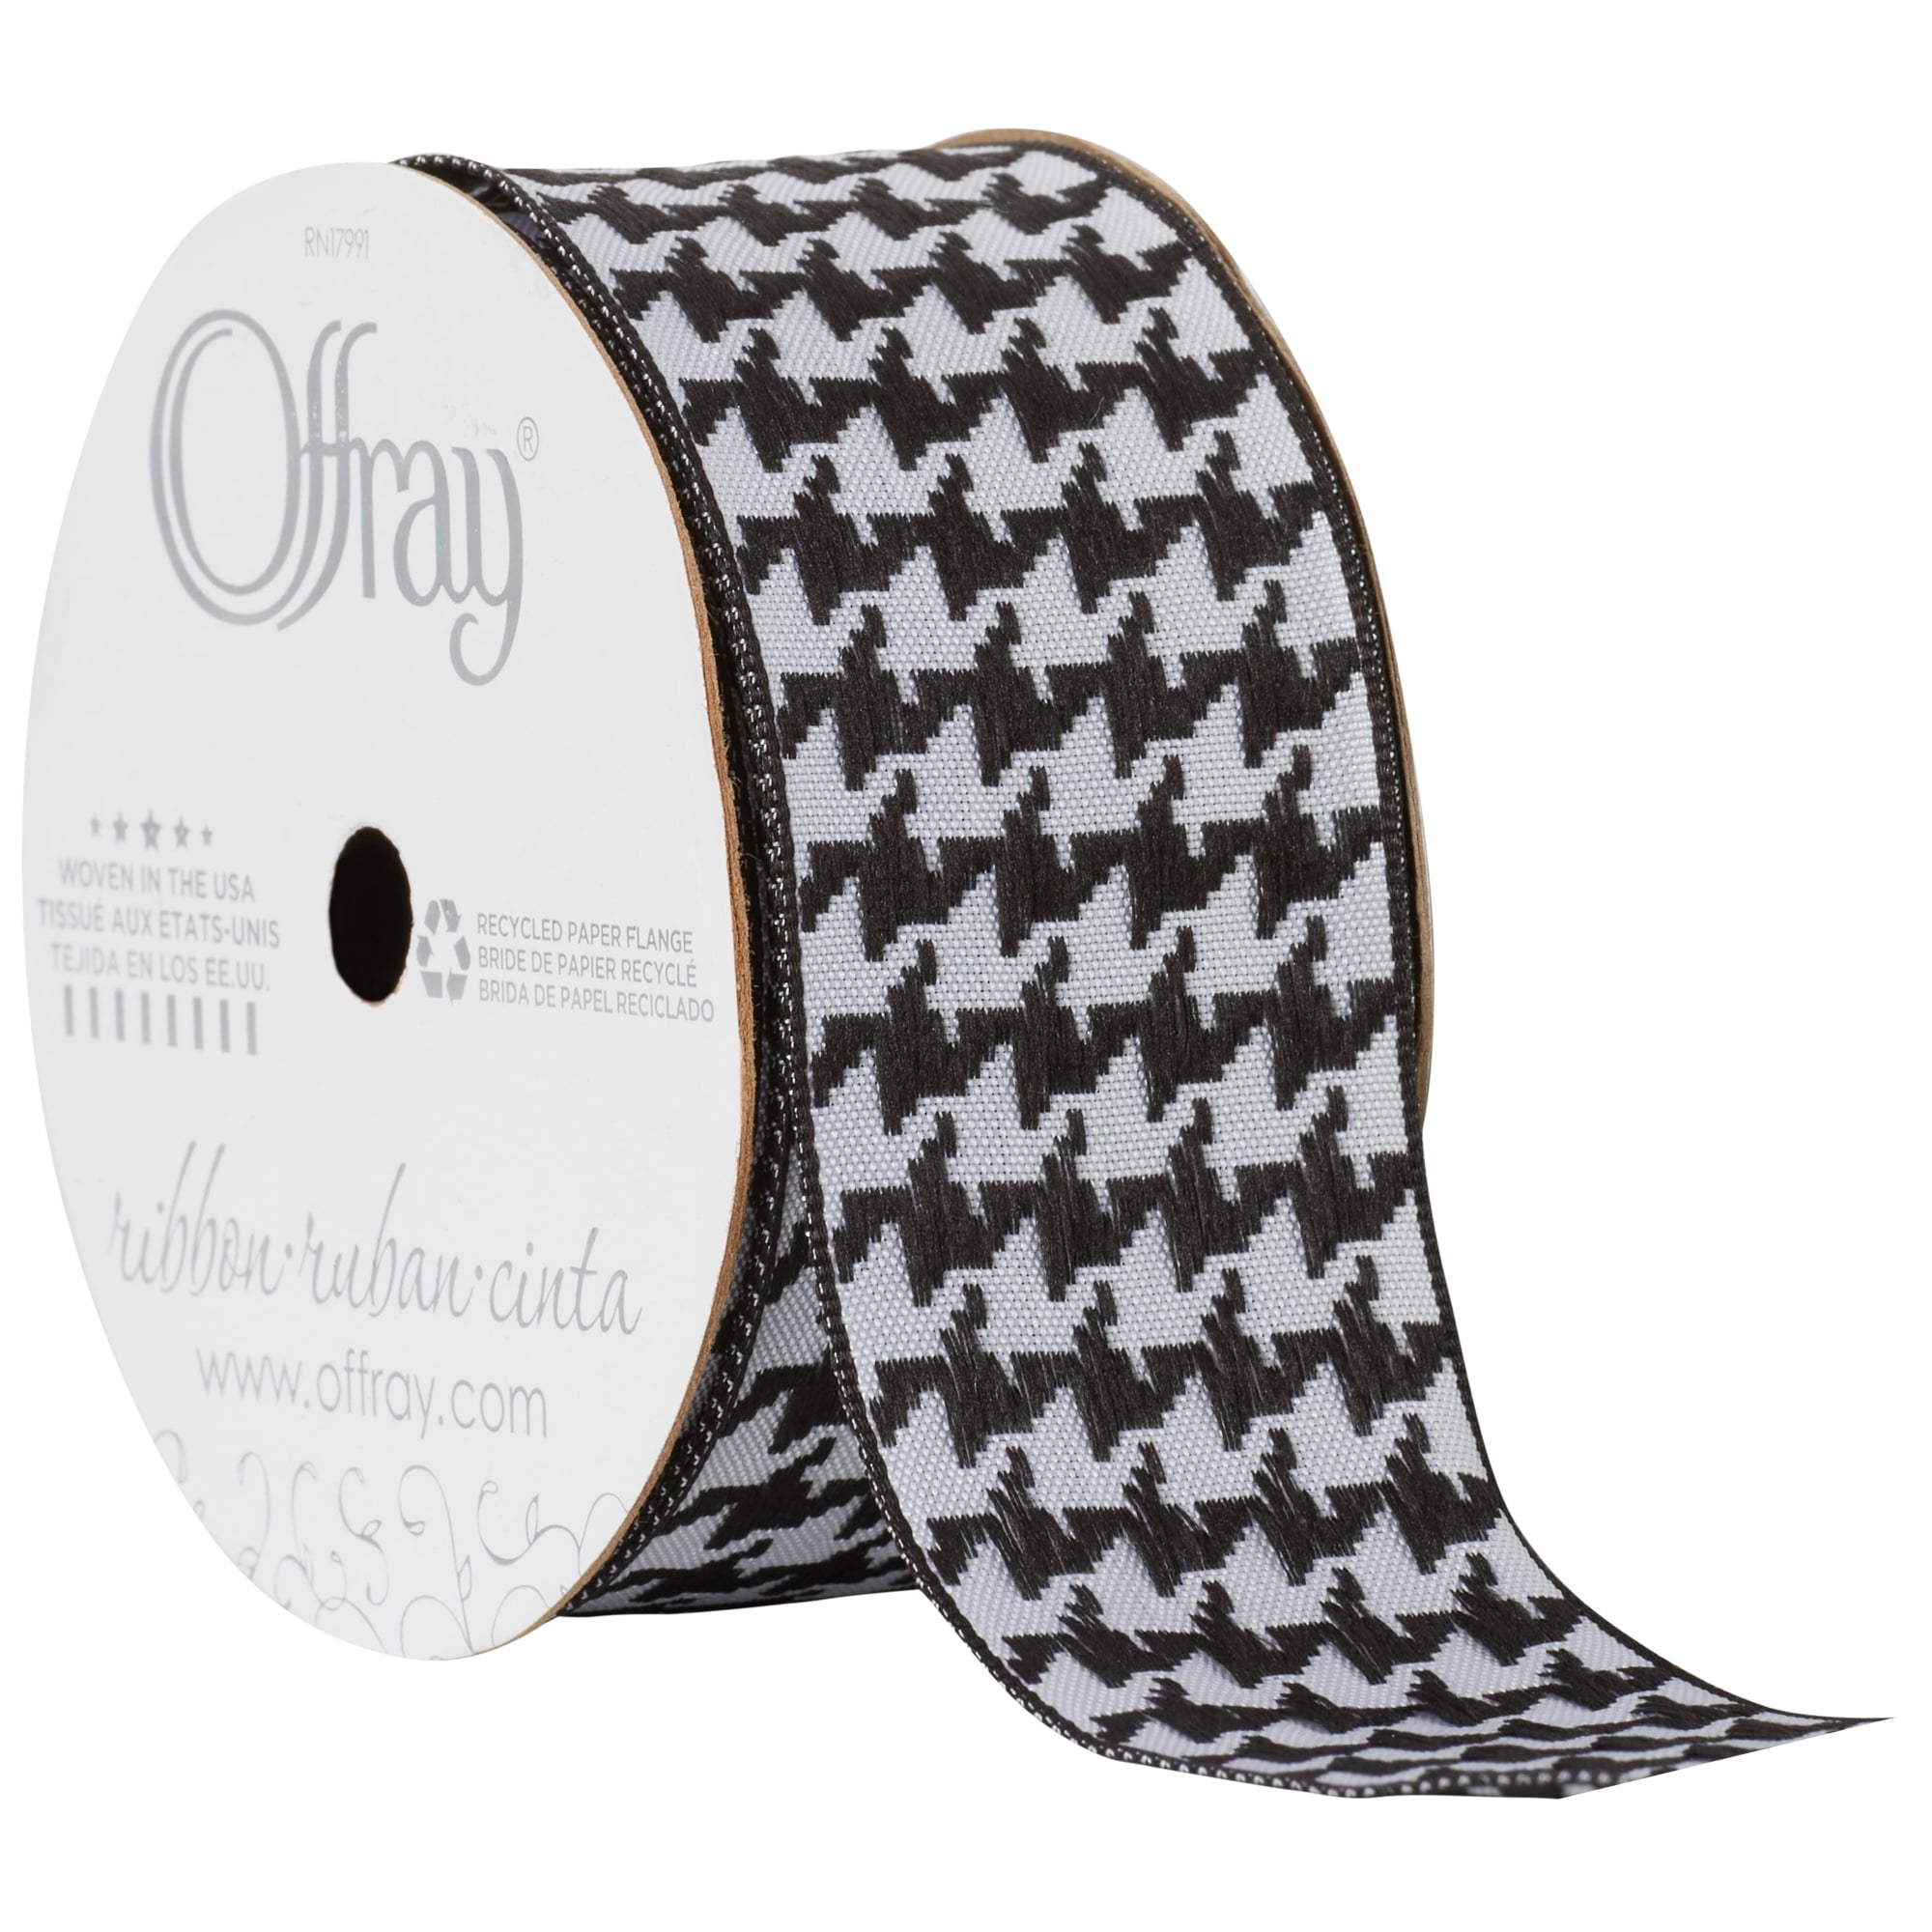 Offray Ribbon, White 1 1/2 inch Wired Houndstooth Woven Ribbon, 9 feet